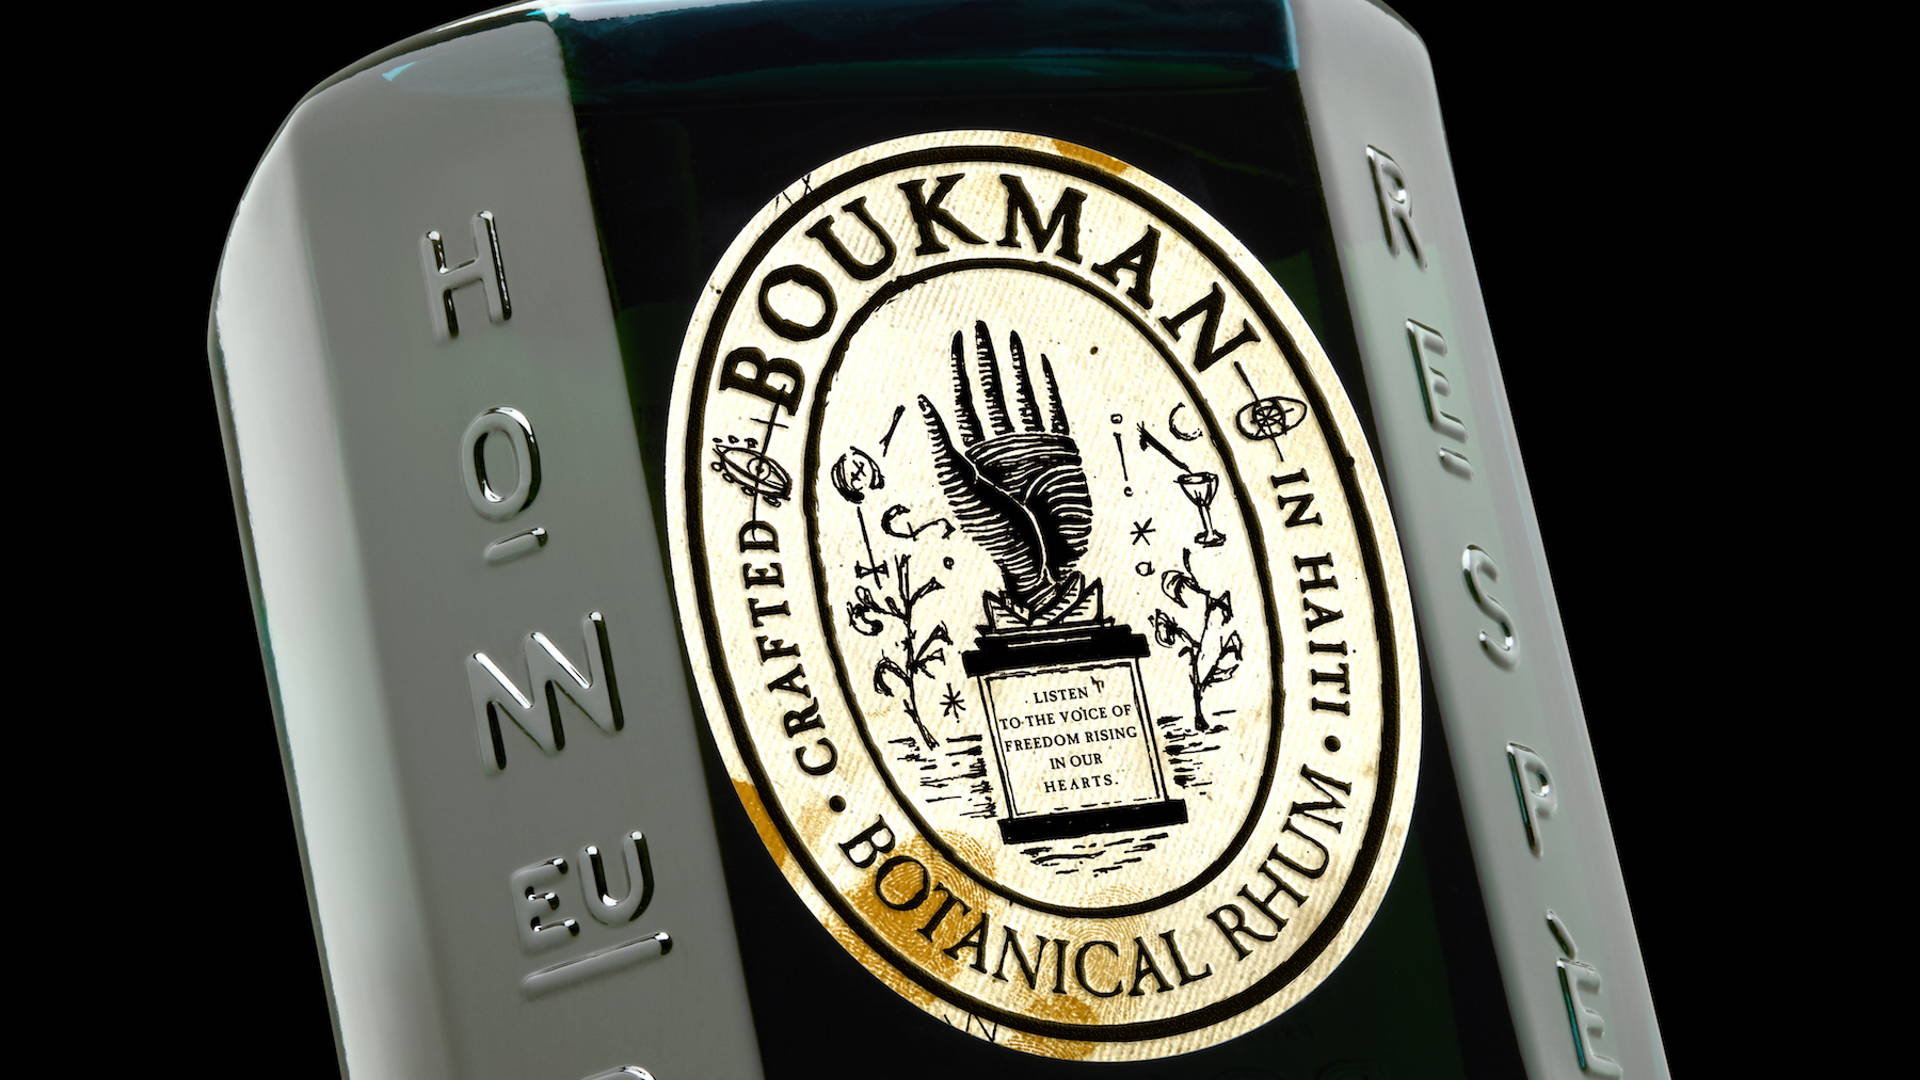 Featured image for Born From Revolution, Boukman Botanical Rhum Has a Social Mission